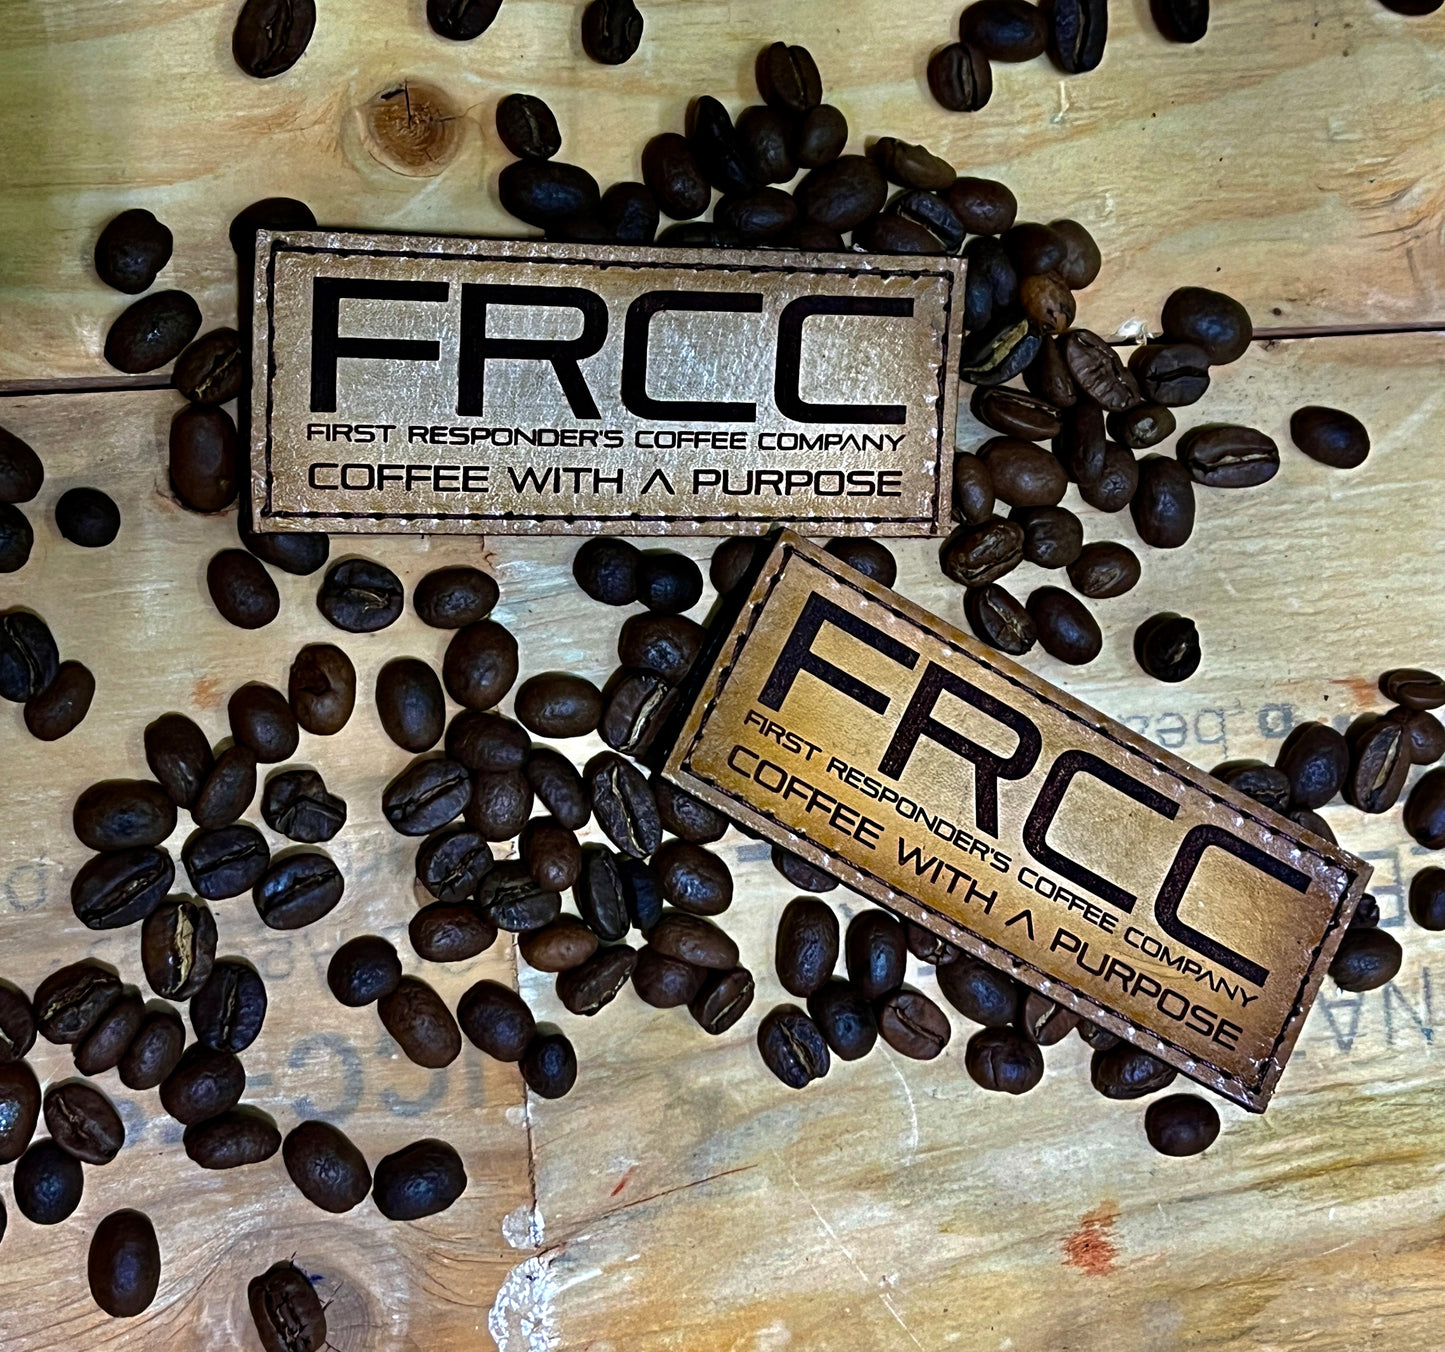 FRCC velcro patches